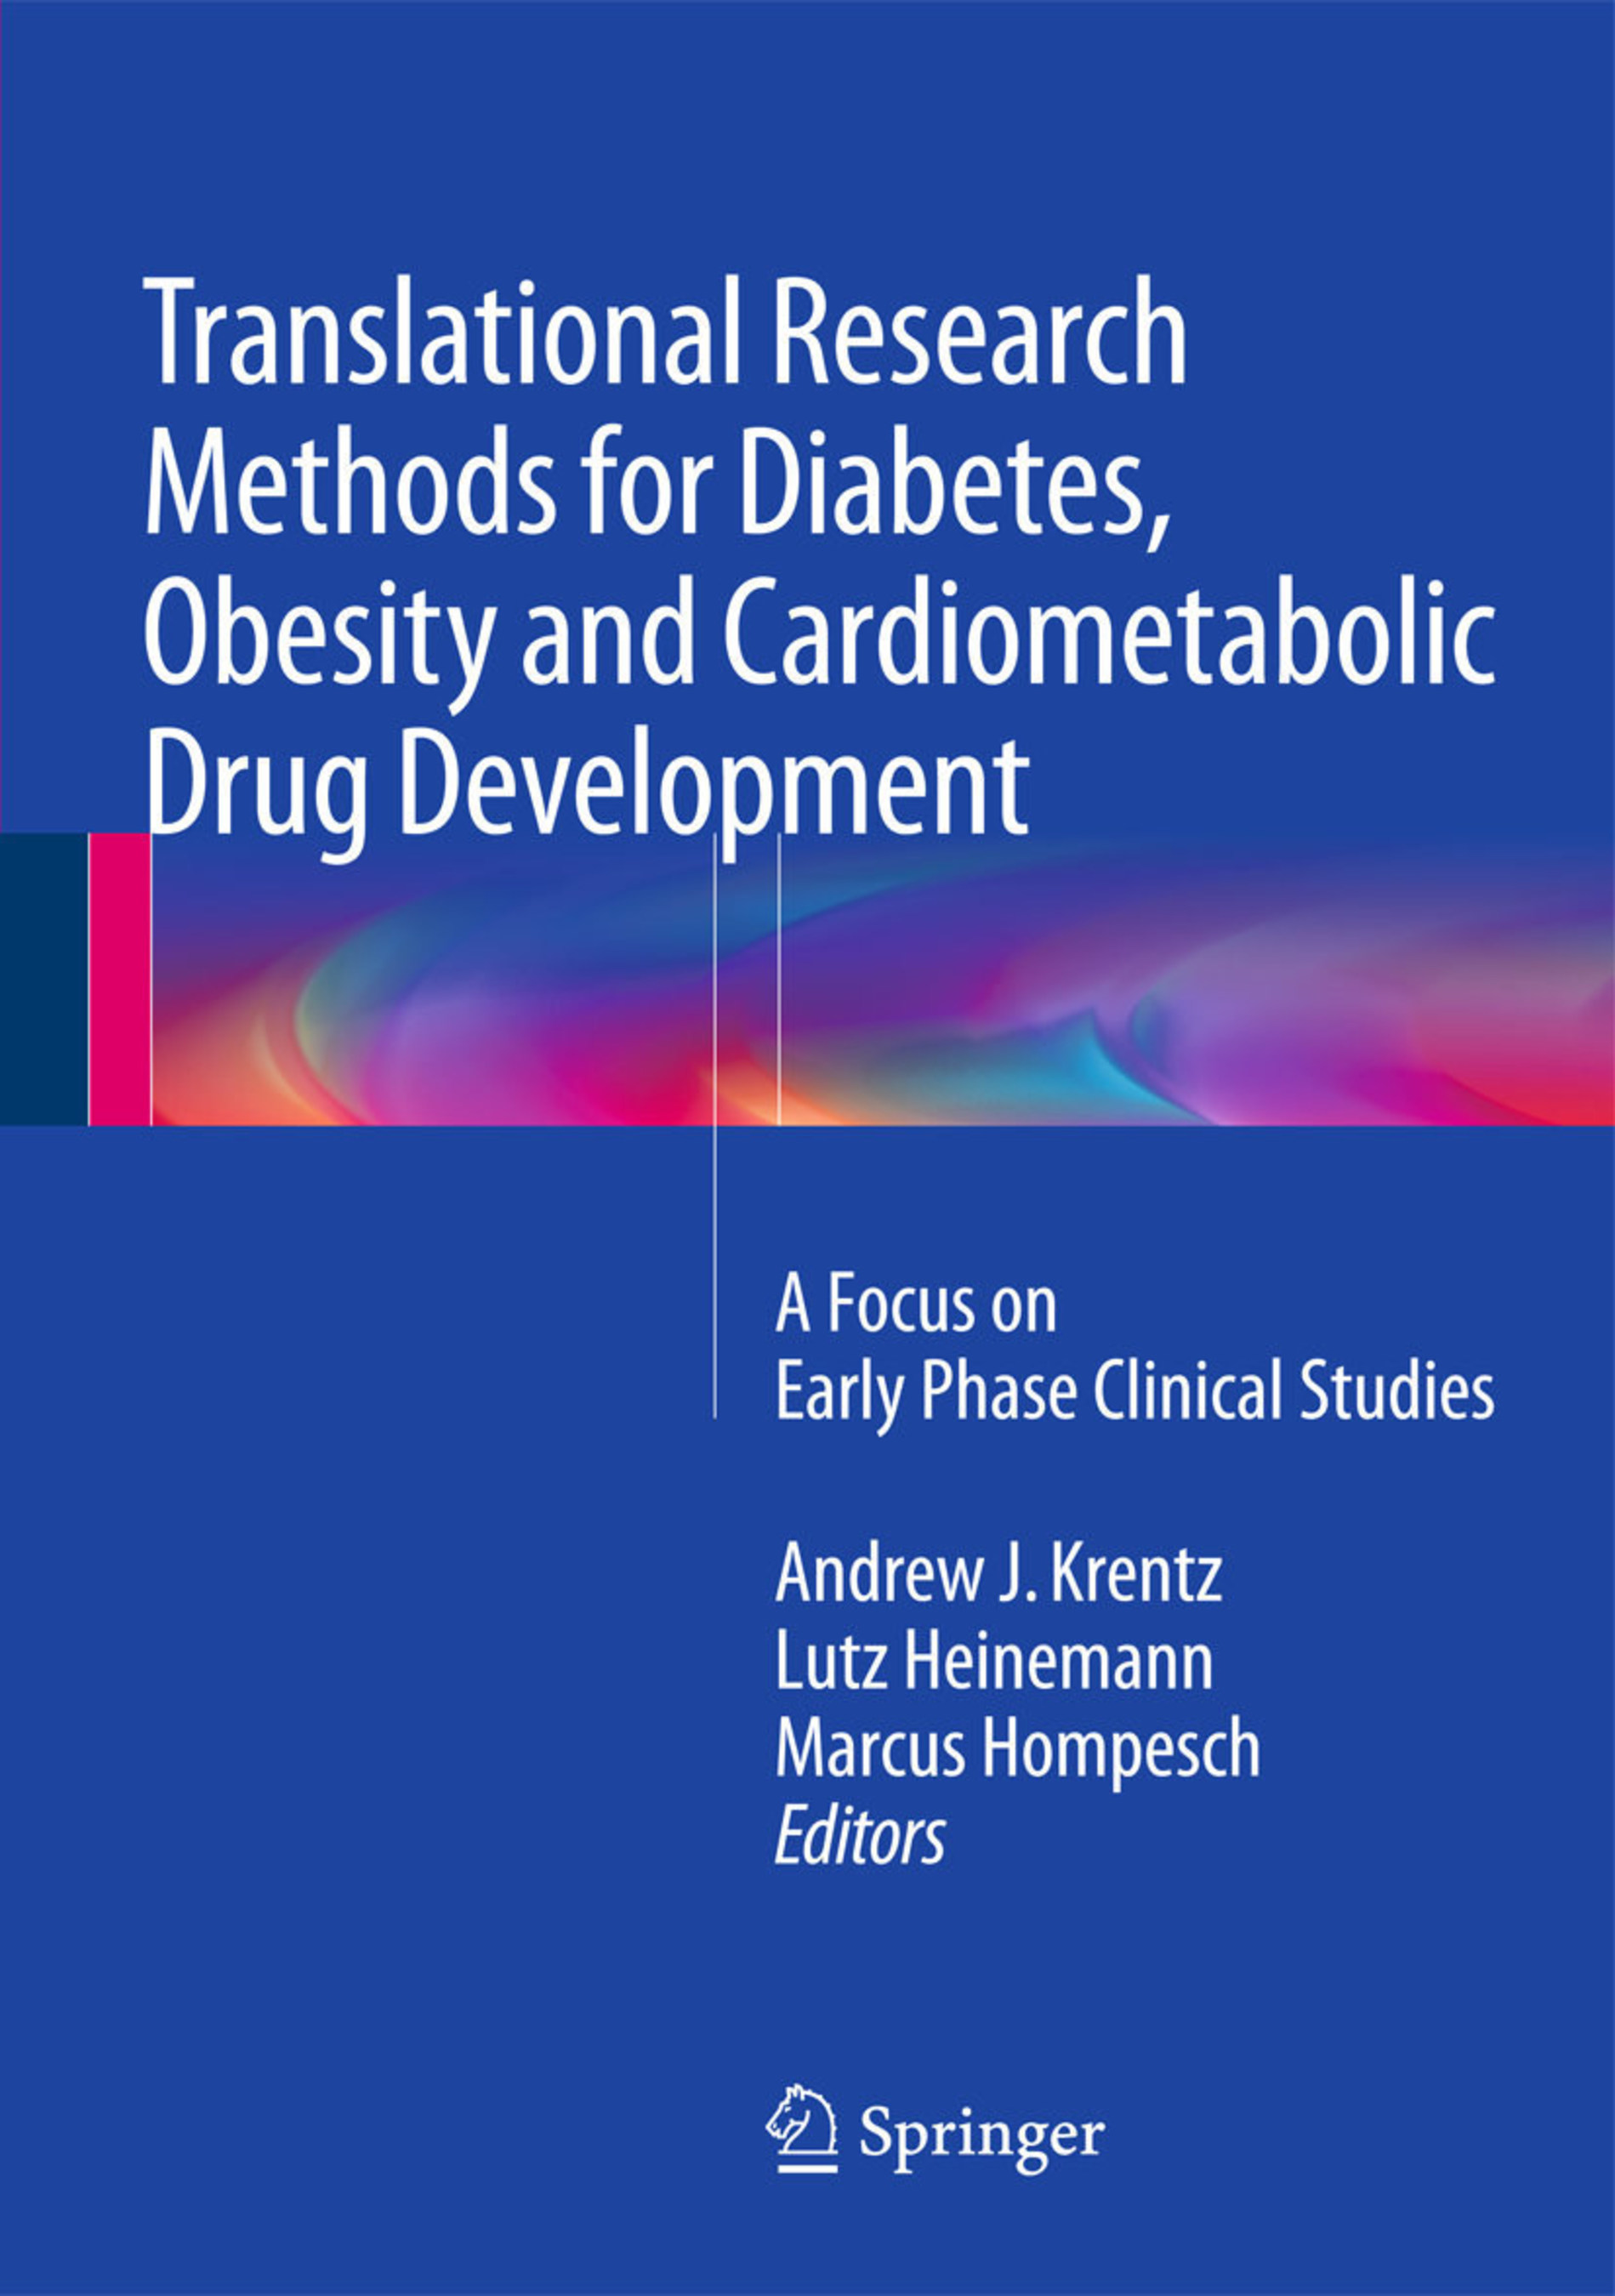 Newly published textbook, a critical review of current and emerging early phase clinical investigation methodologies for diabetes, obesity and cardiometabolic drug development